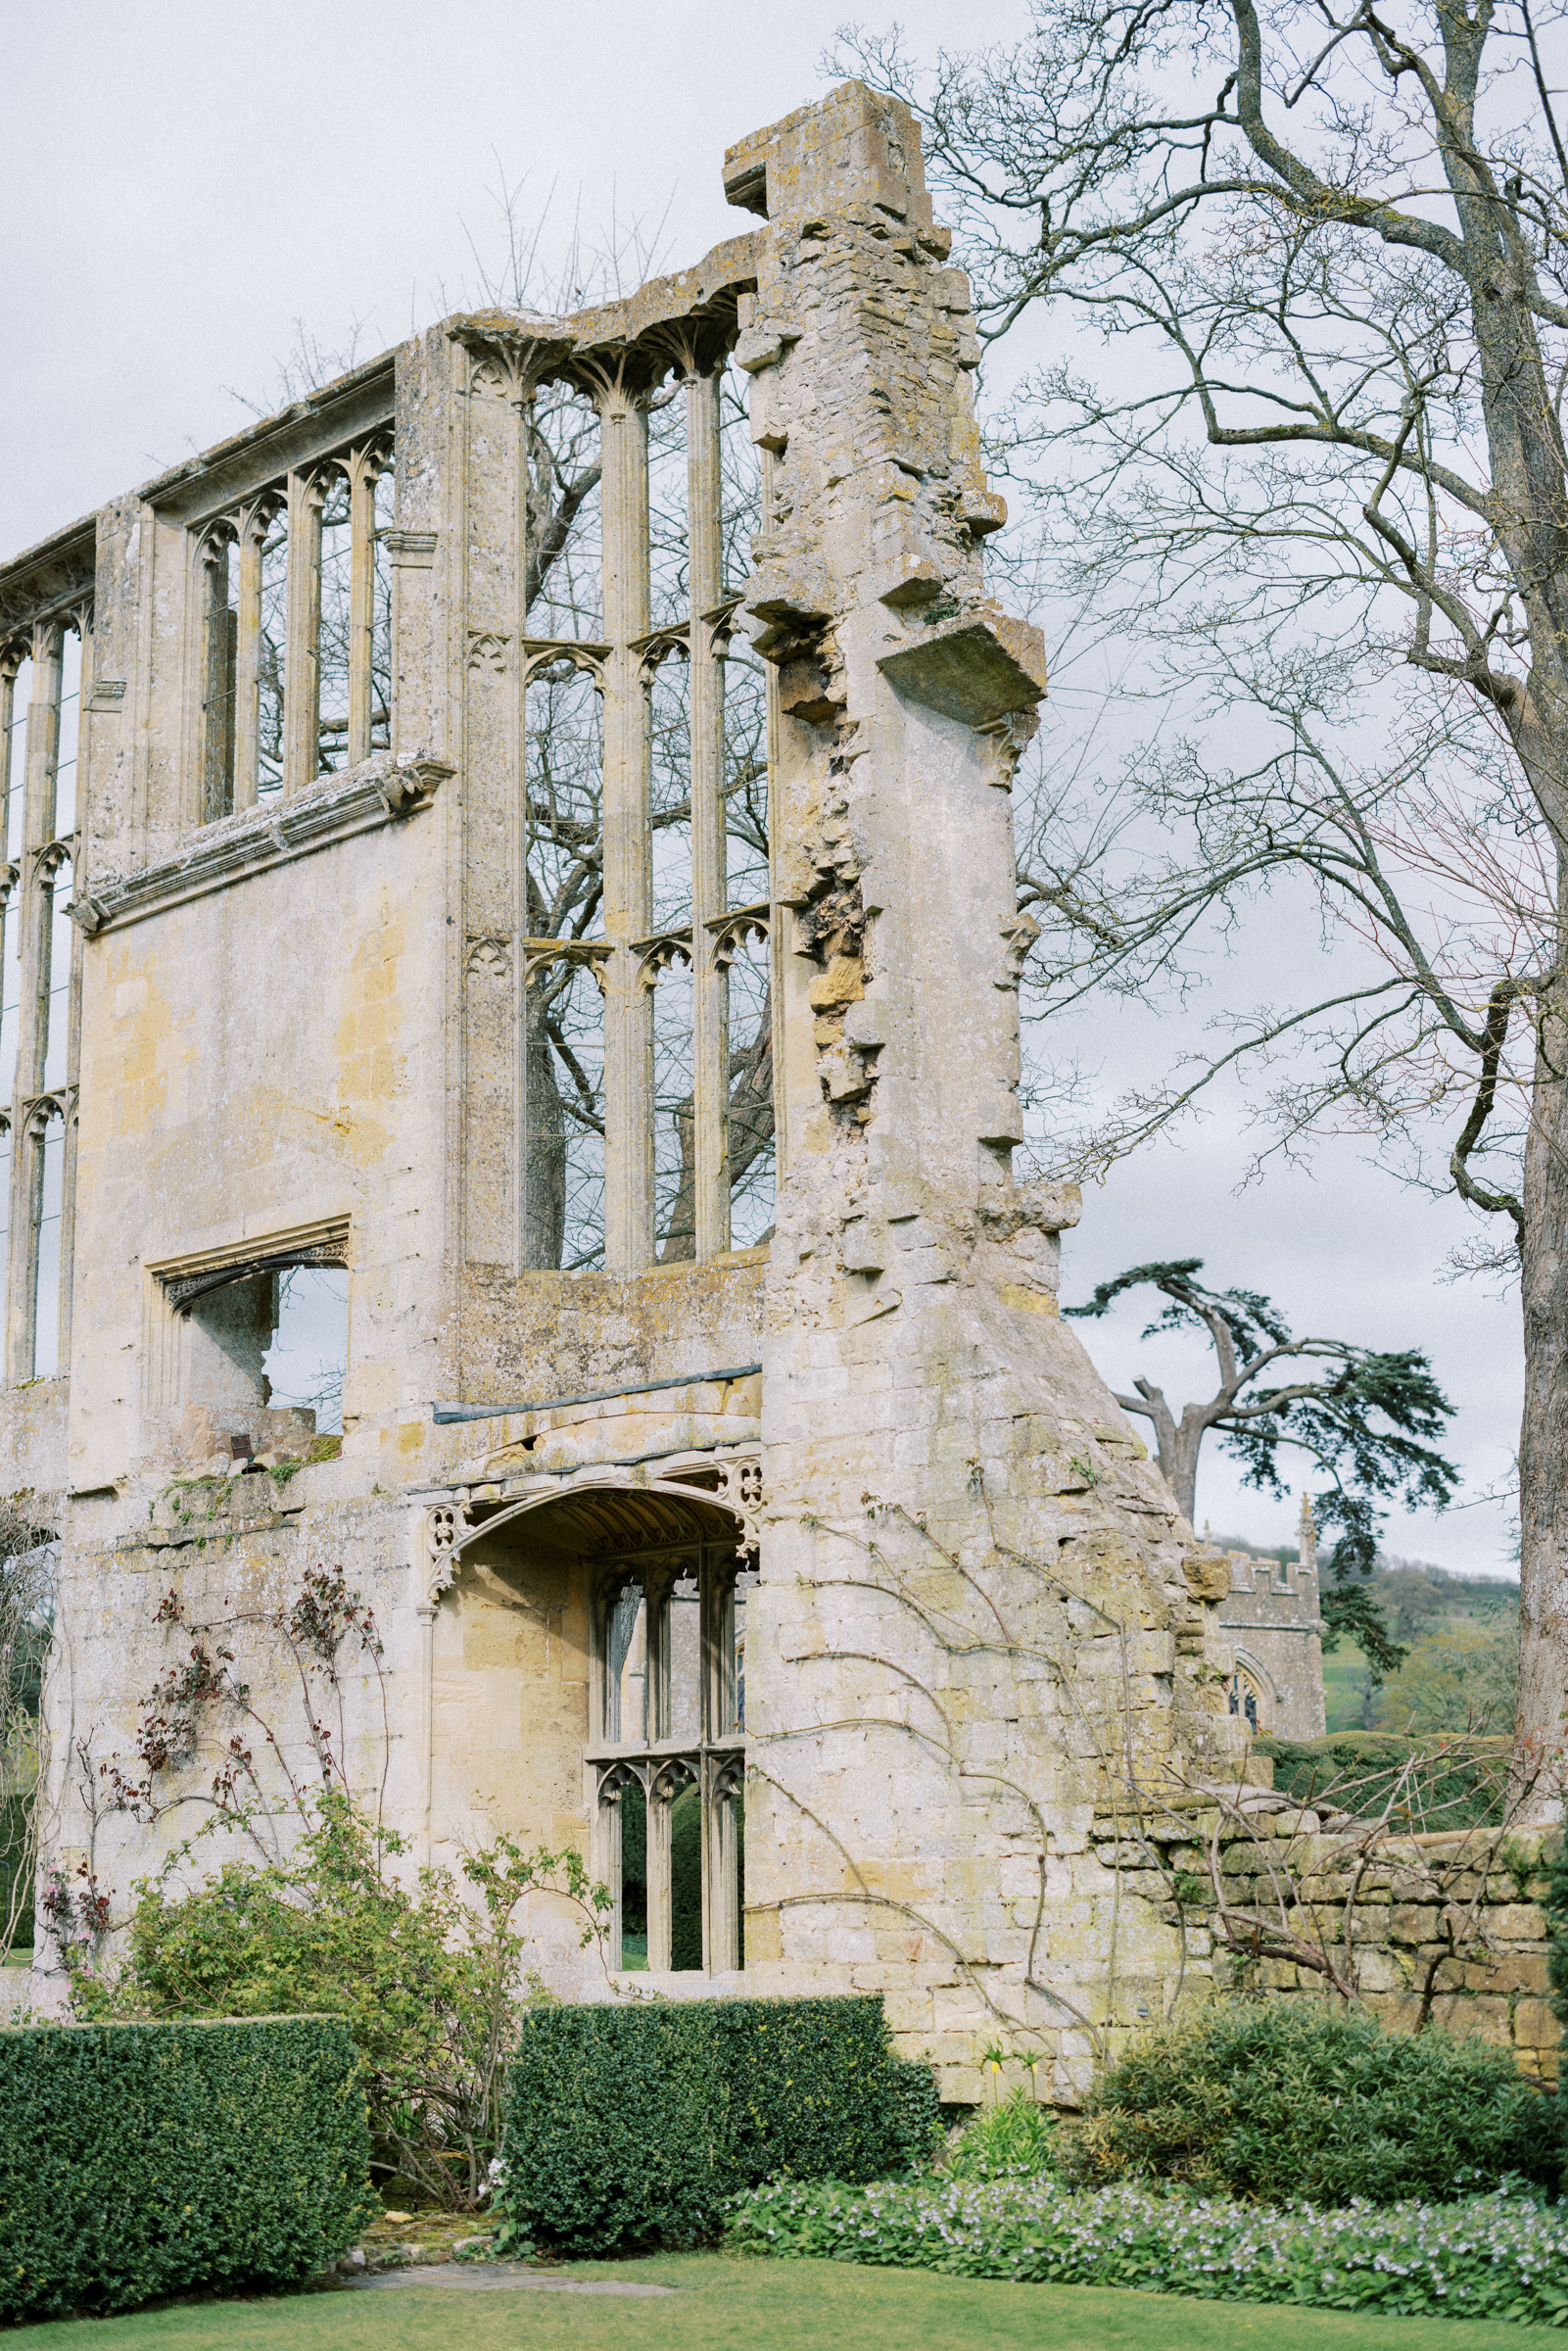 The gorgeous ruins at Sudeley Castle Wedding venue